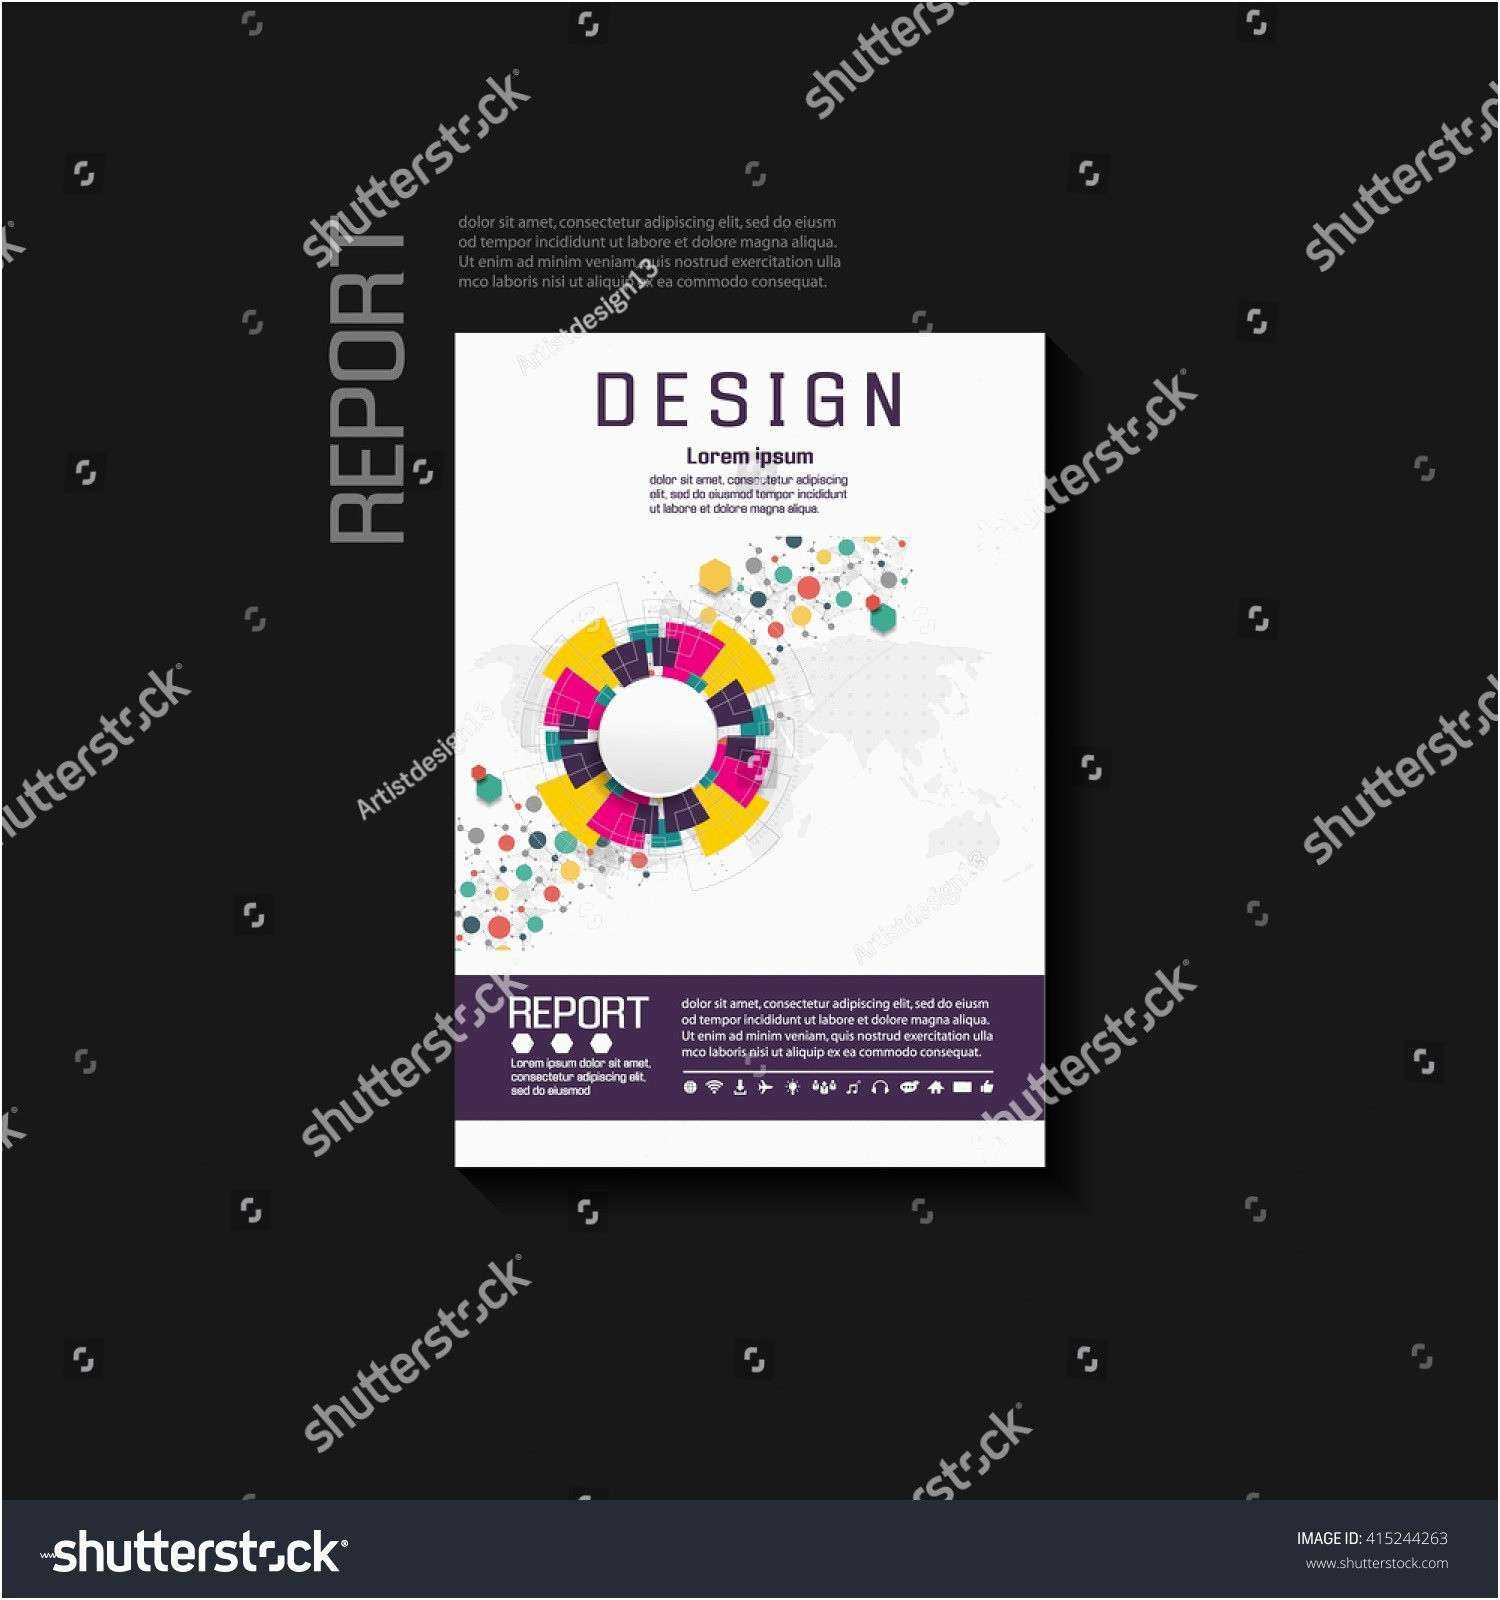 Business Cards For Teachers Templates Free – Caquetapositivo With Regard To Business Cards For Teachers Templates Free